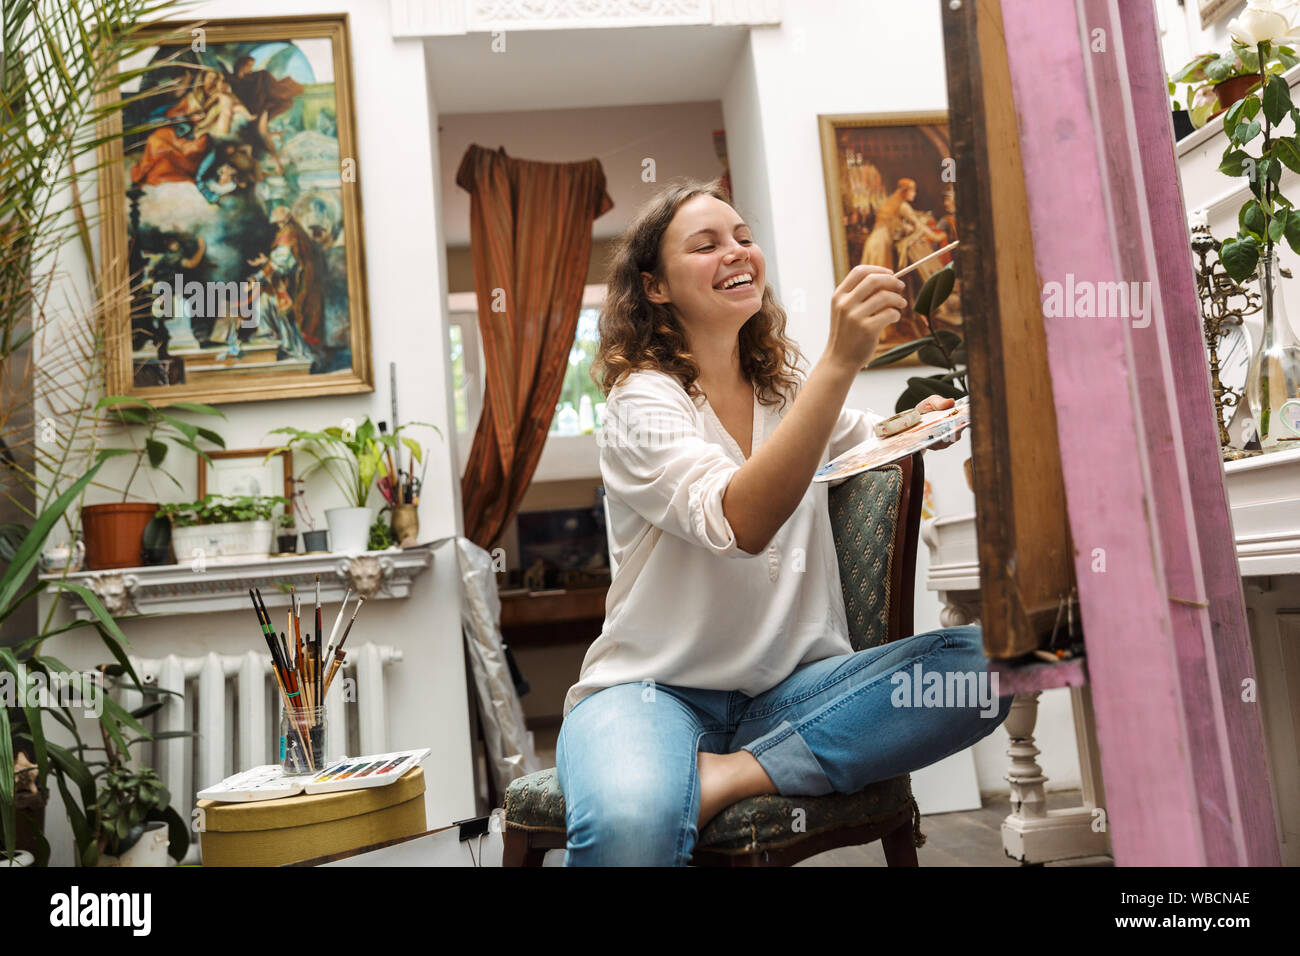 Image of smiling artistic woman sitting on chair while drawing picture on canvas with pain brush and acrylic colors in workshop or master class Stock Photo